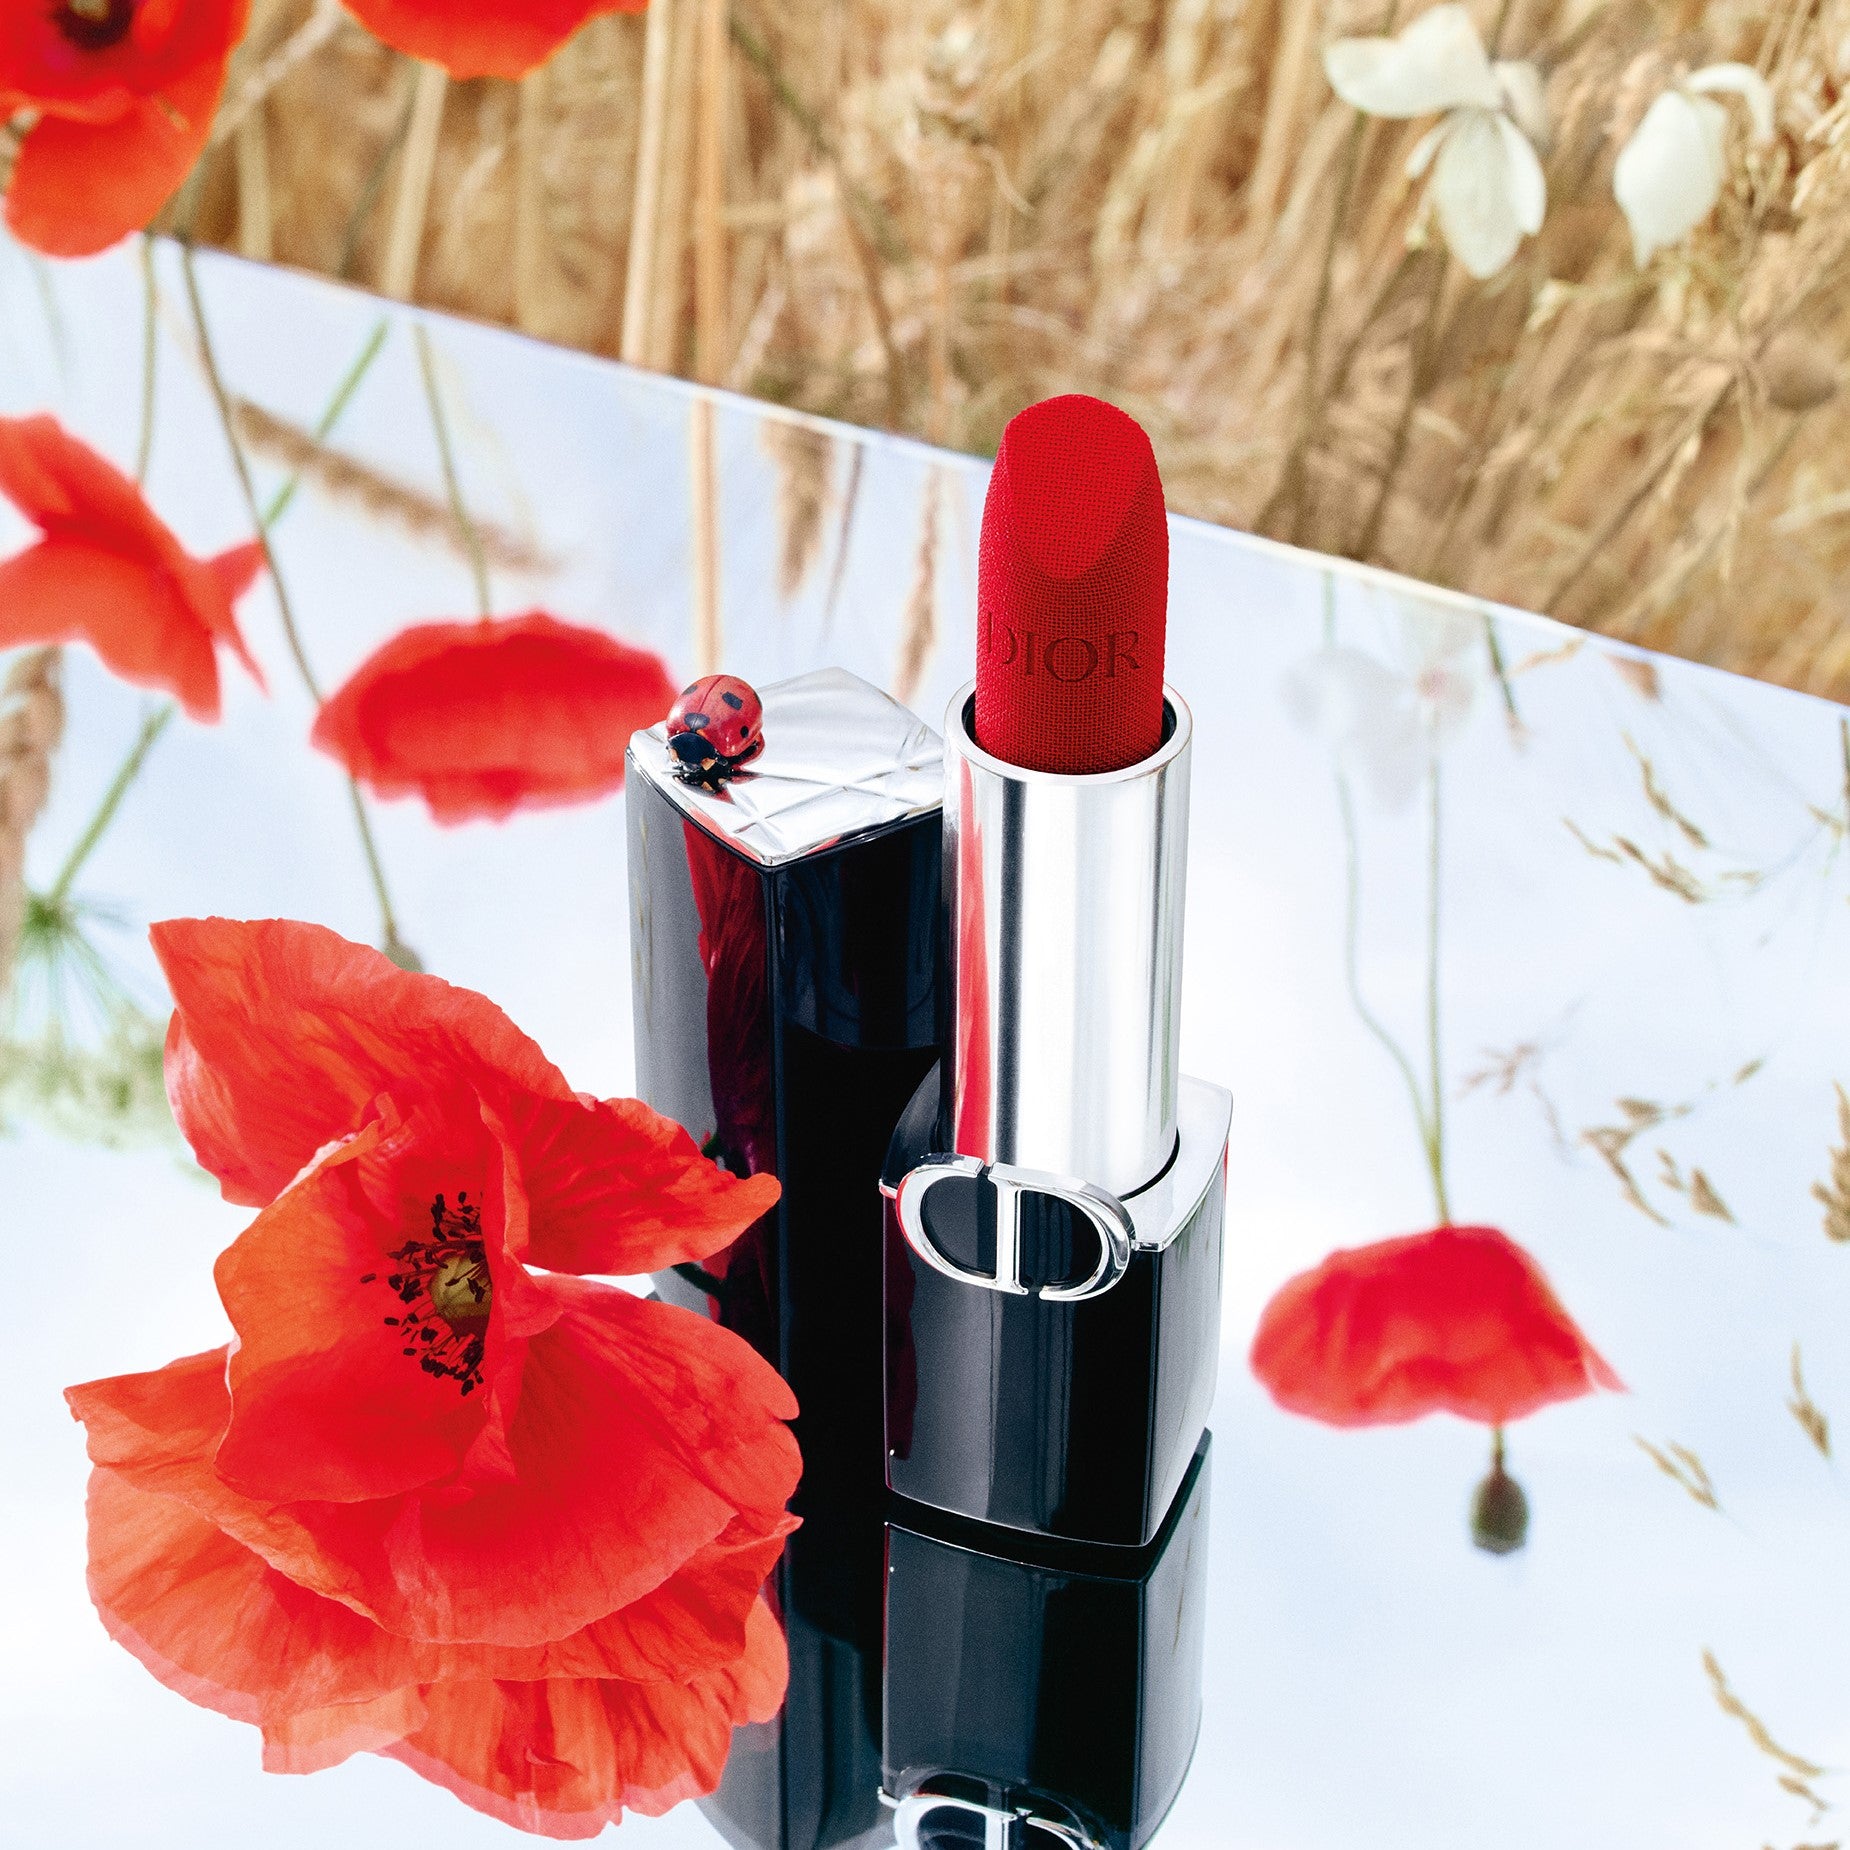 ROUGE DIOR COUTURE COLOUR REFILLABLE LIPSTICK | 4 Finishes: Satin, Matte, Metallic and Velvet - Floral Lip Care - Comfort and Long Wear